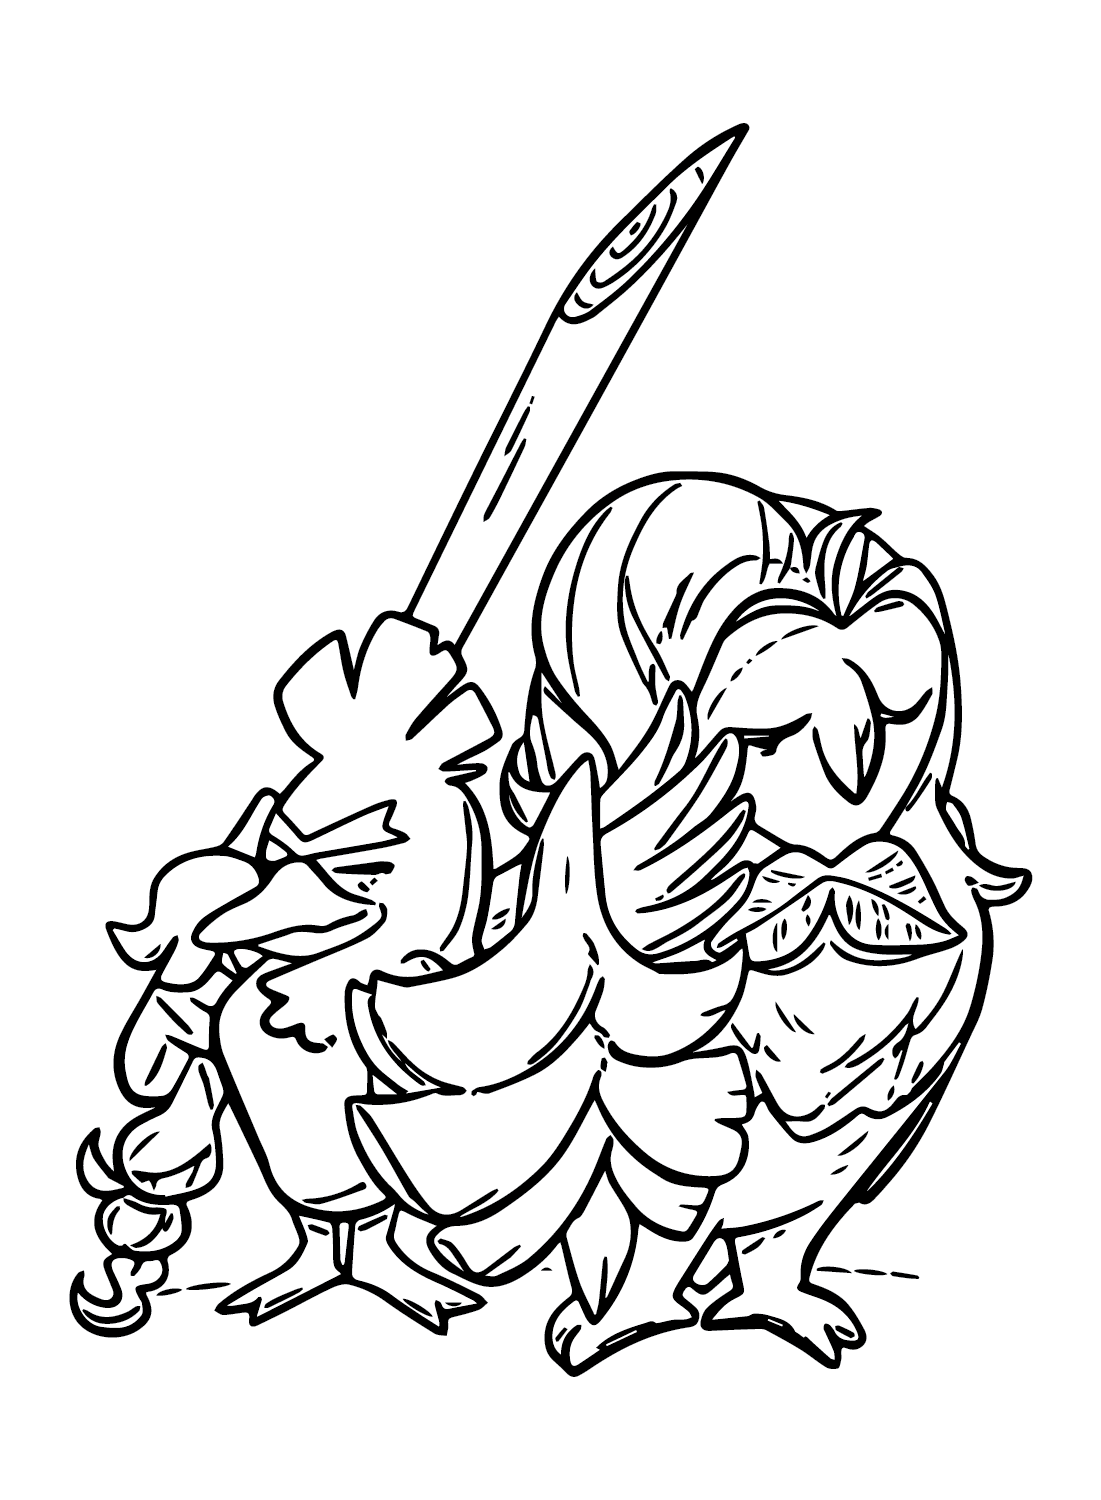 Sirfetch’d Images Coloring Page